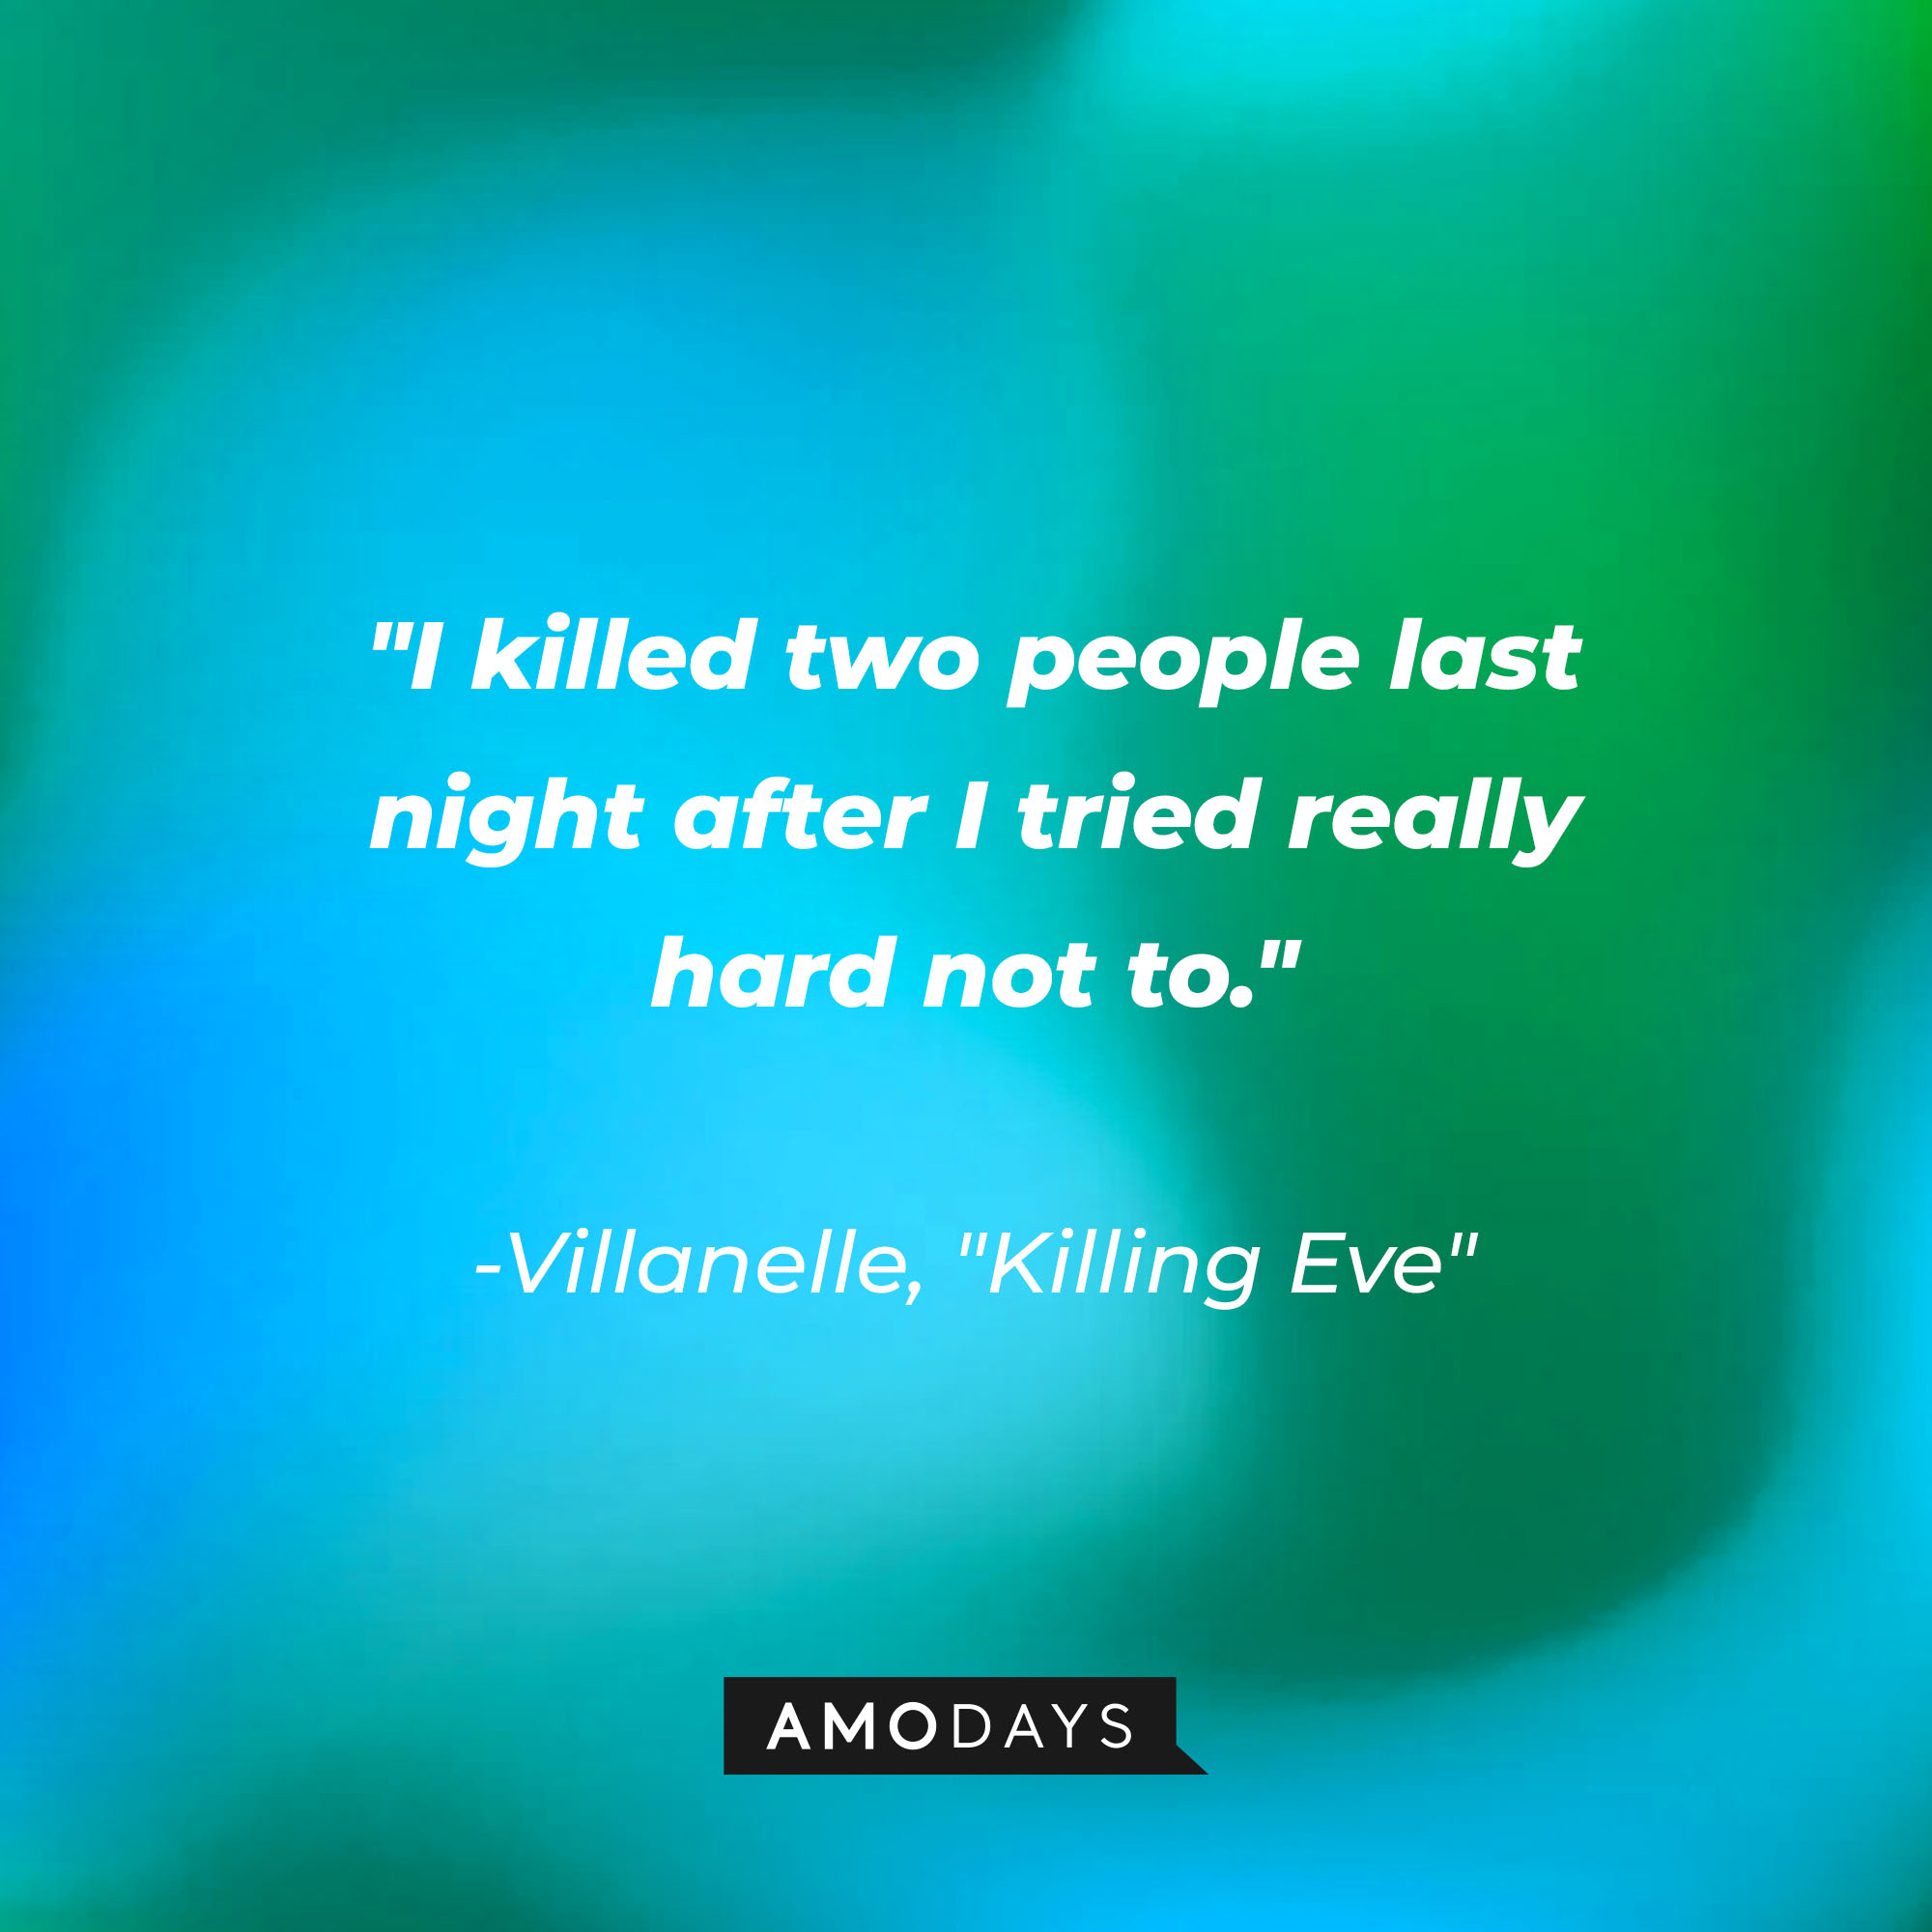 Villanelle's quote: "I killed two people last night after I tried really hard not to." | Source: Amodays